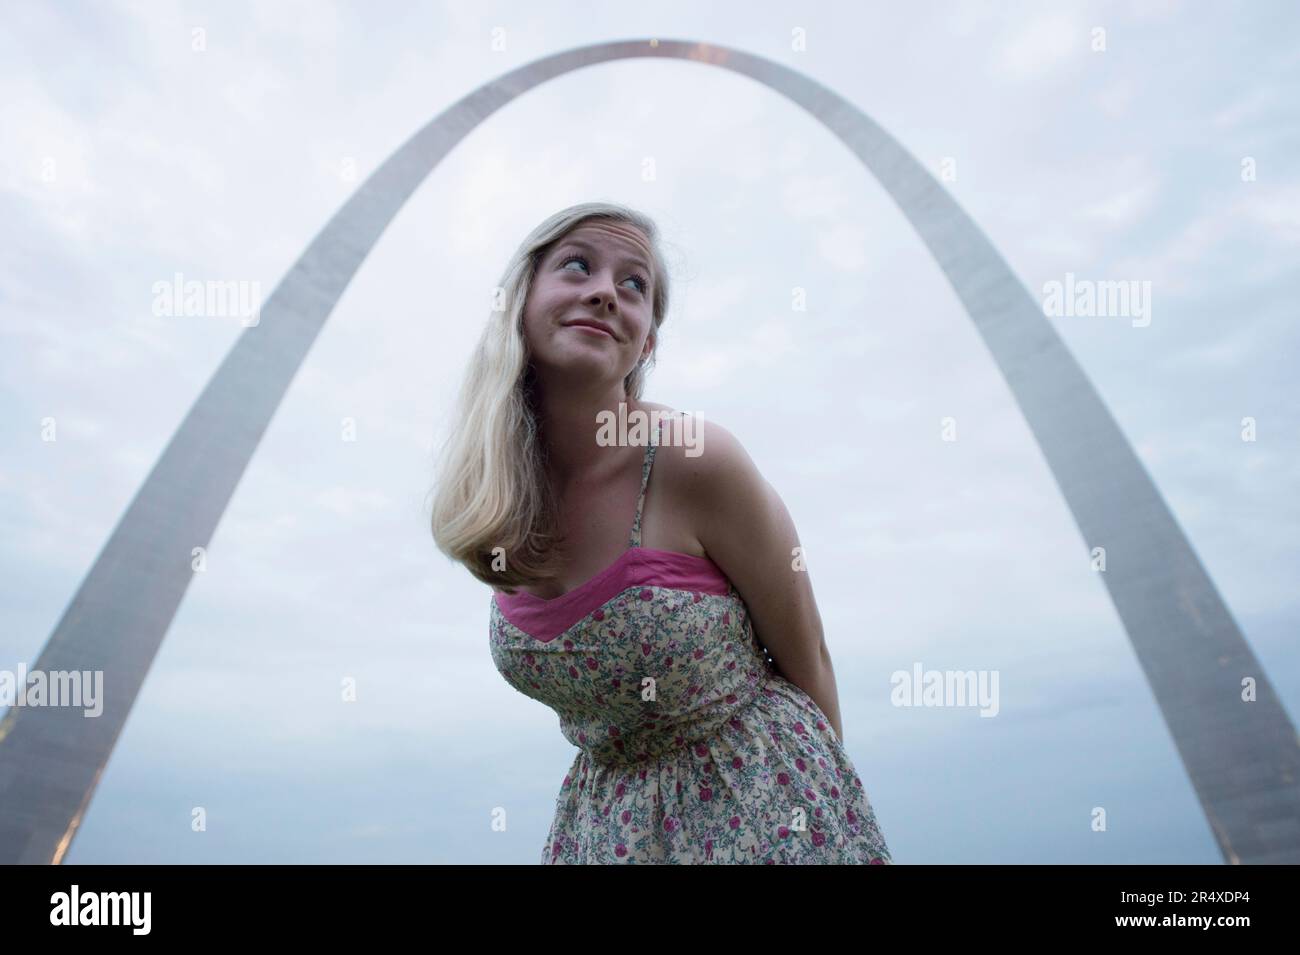 Teenage girl at the Gateway Arch monument in St. Louis, Missouri, USA; St. Louis, Missouri, United States of America Stock Photo